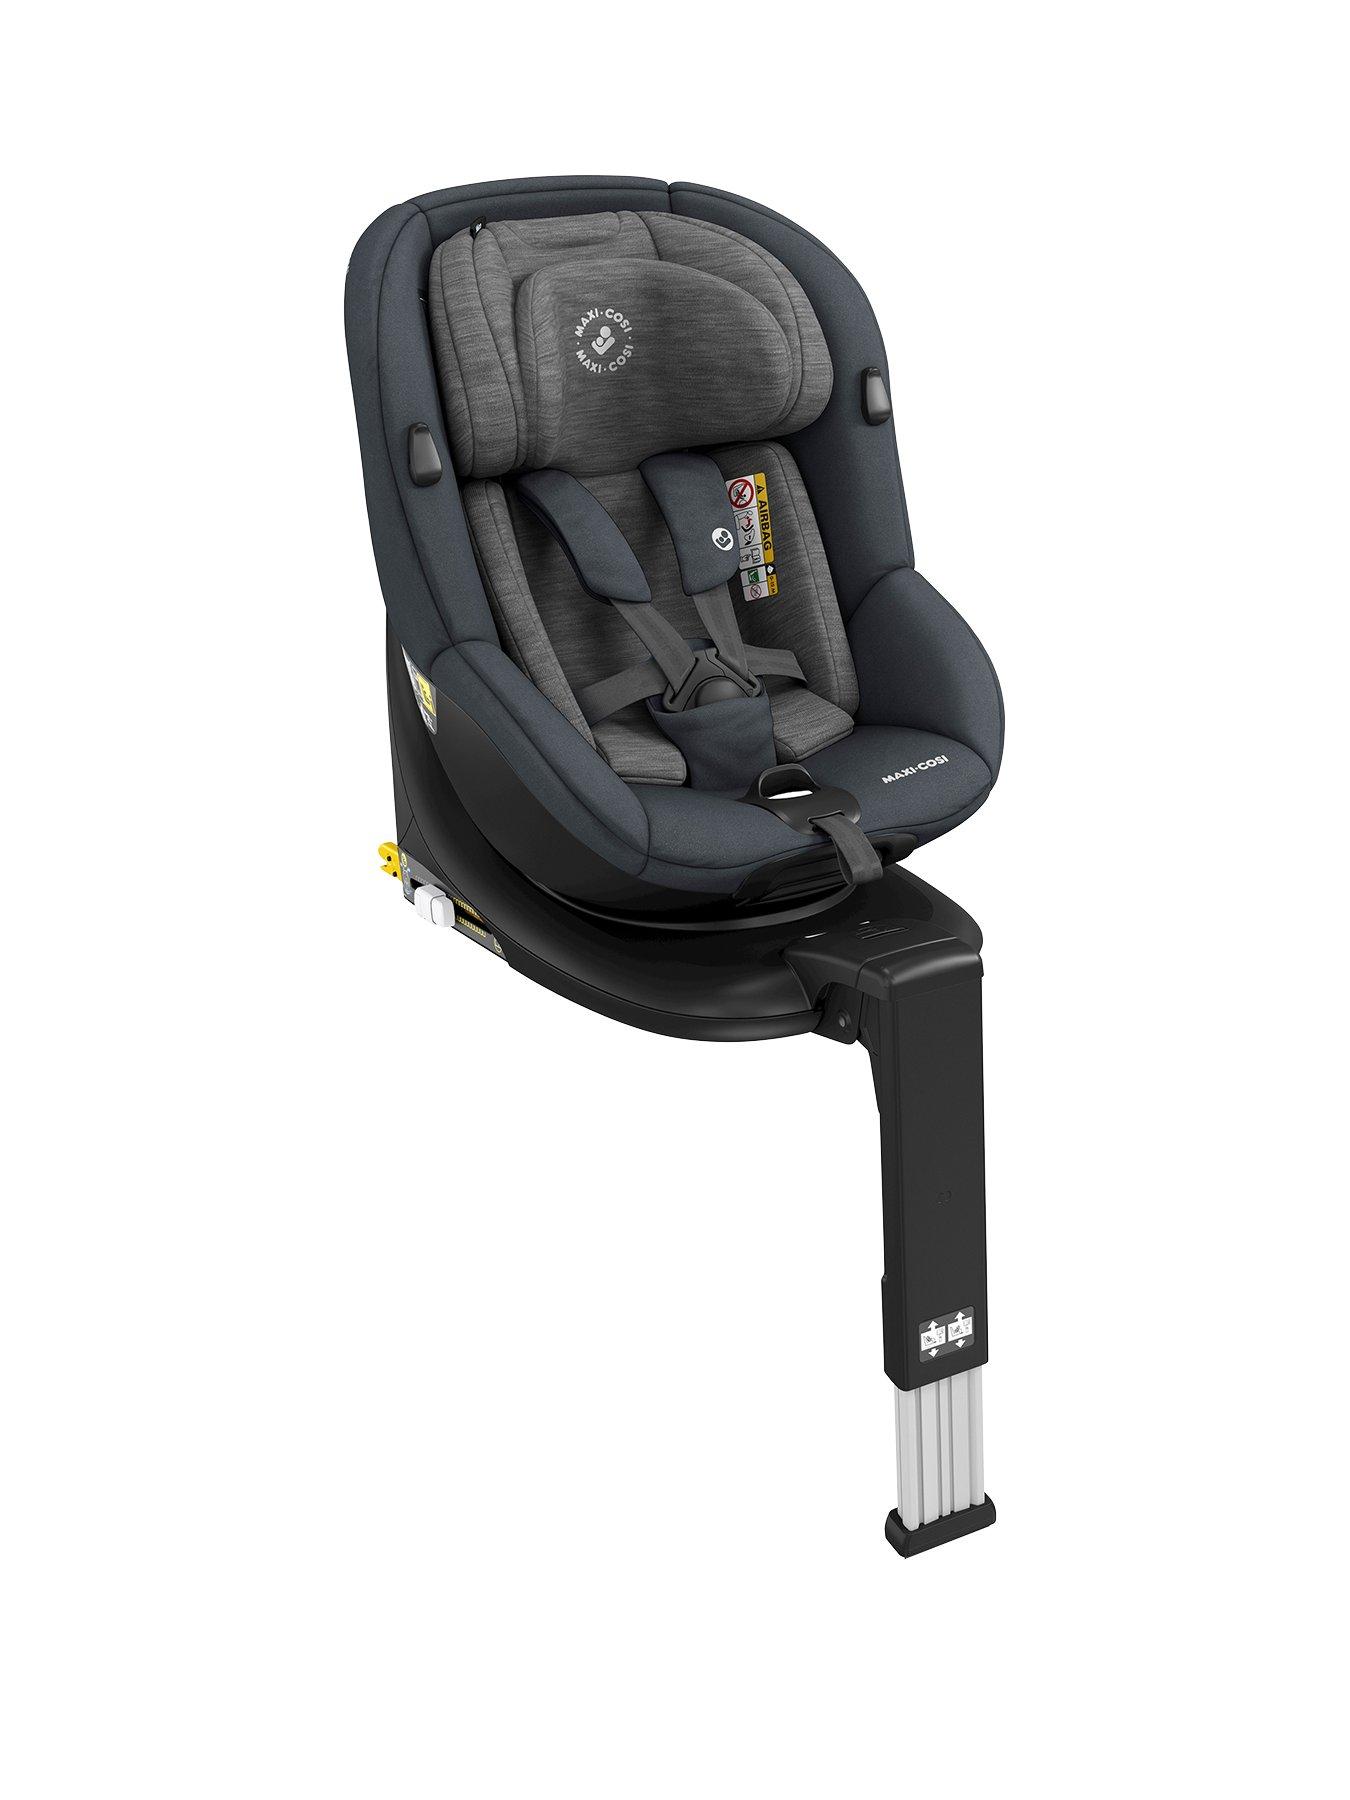 Maxi Cosi Car Seats Child Baby Www Littlewoods Com